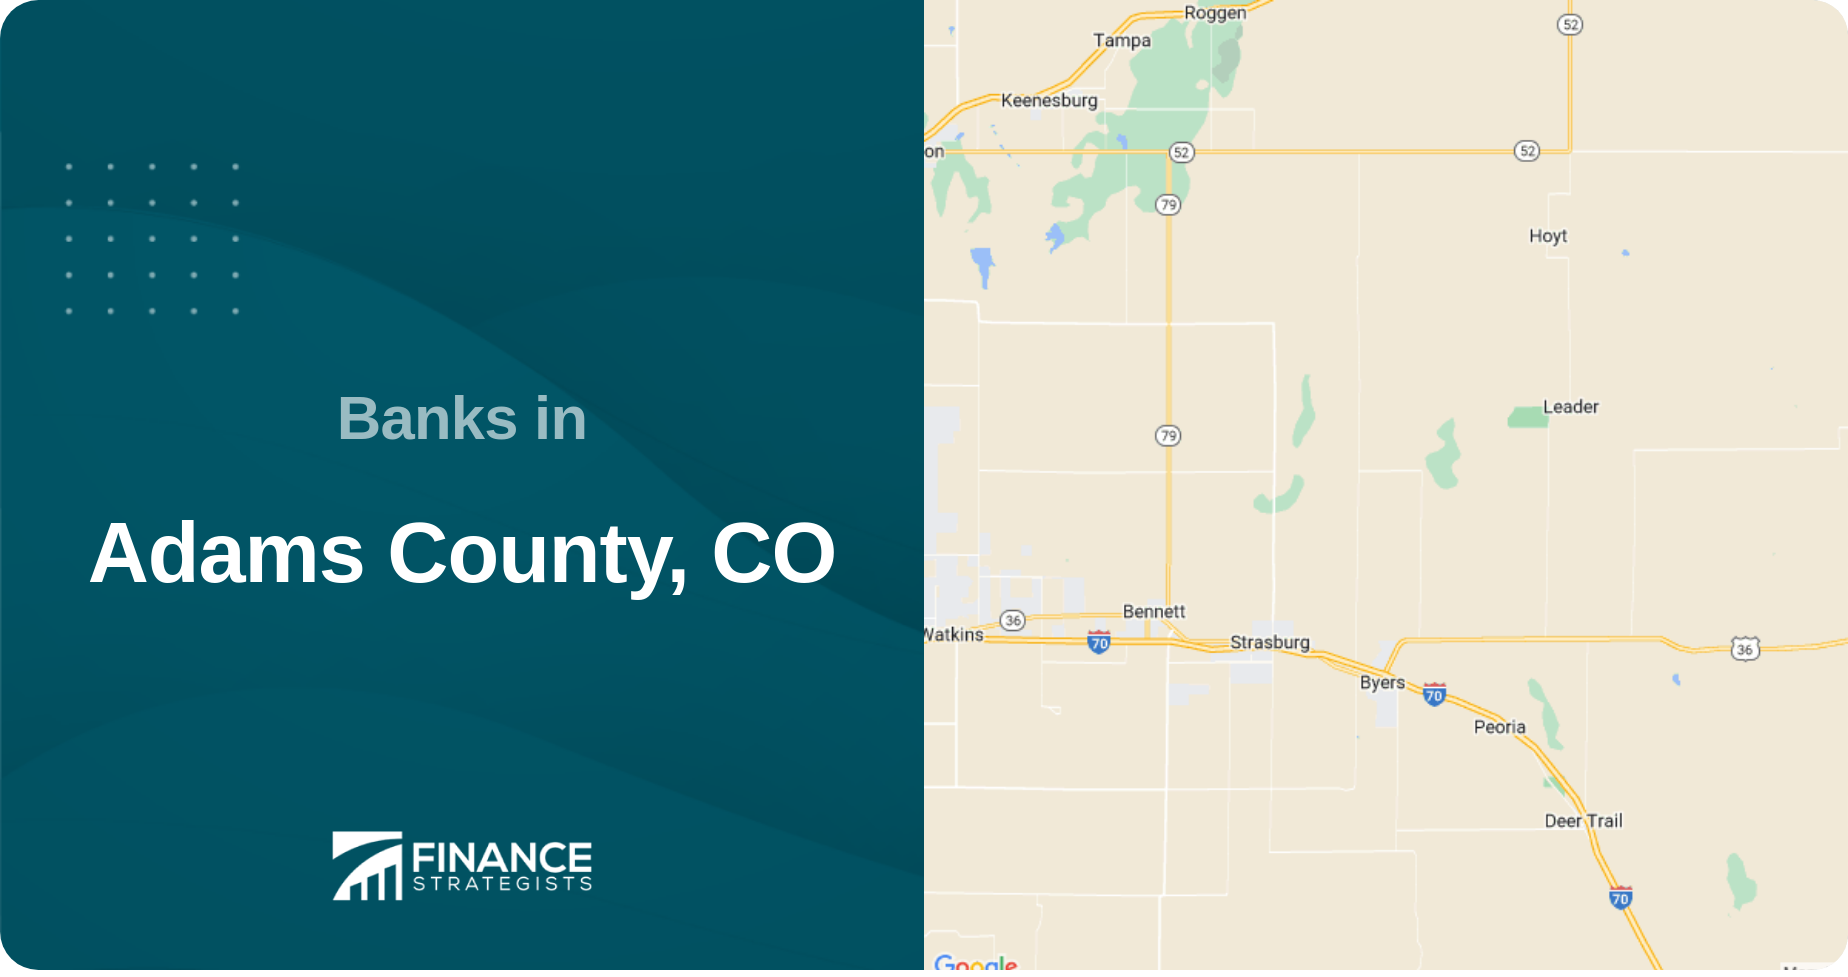 Banks in Adams County, CO